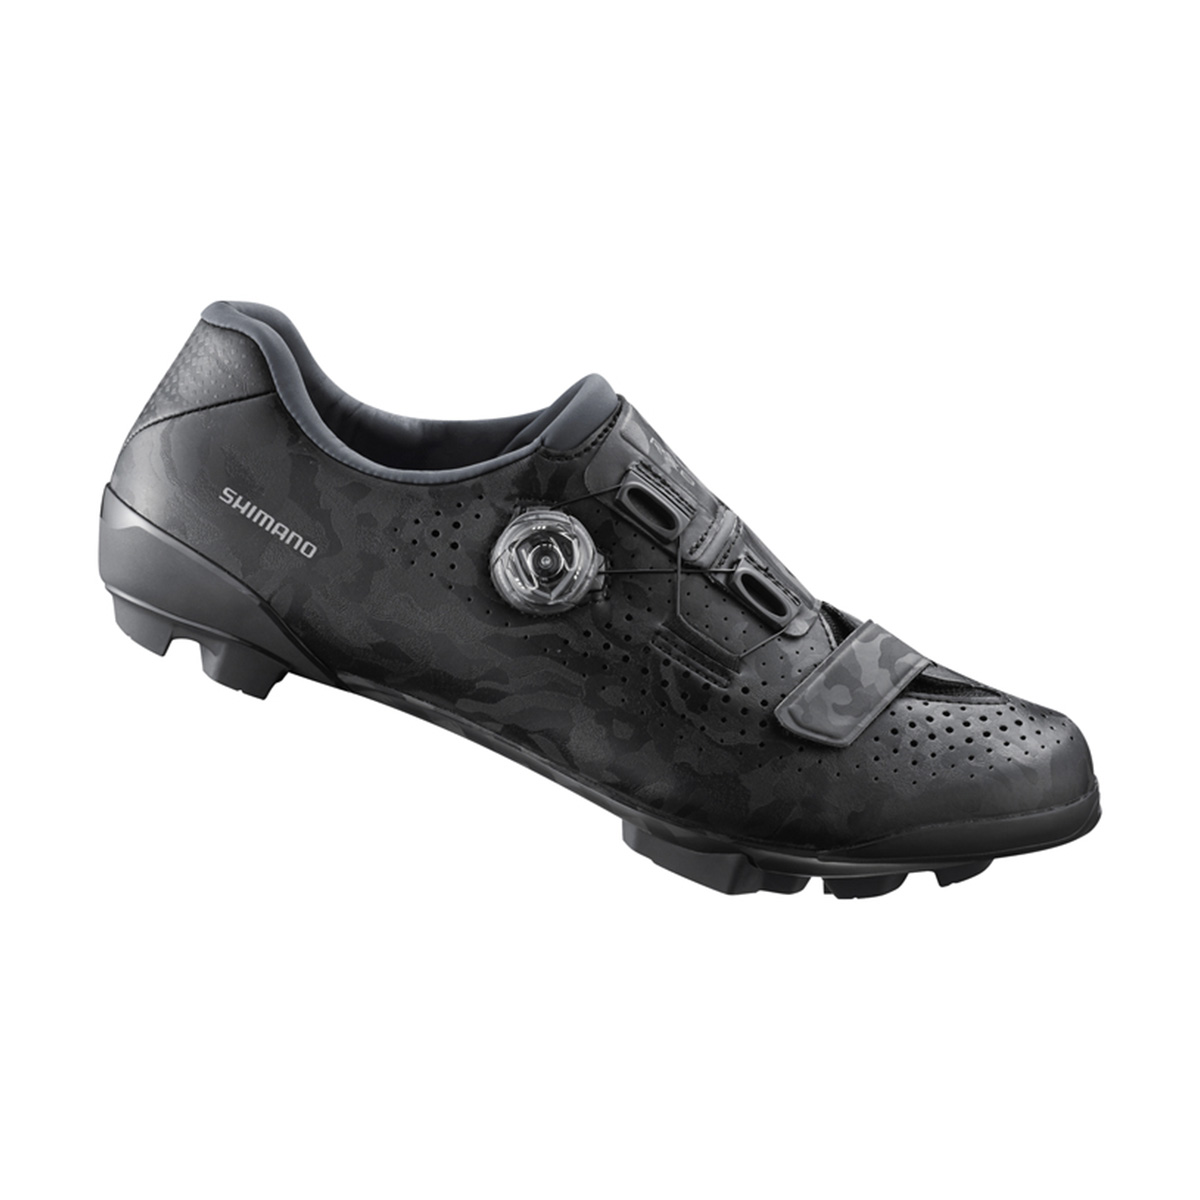 CHAUSSURES SHIMANO RX800